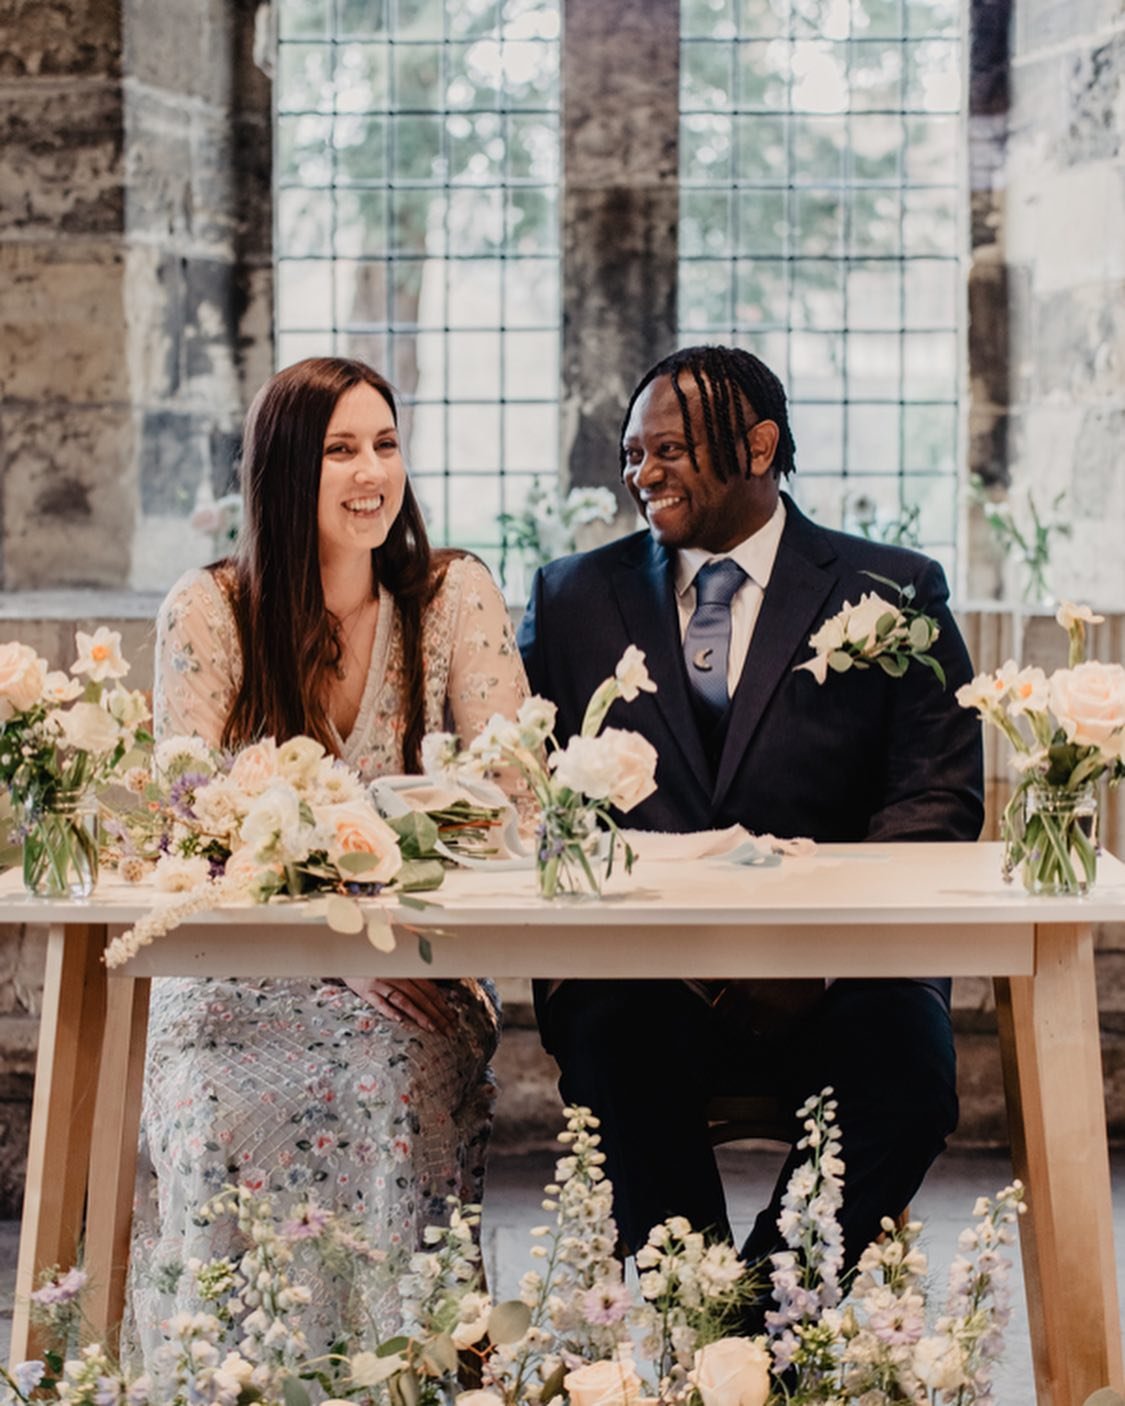 Reflecting one year on from Emma &amp; Trevor&rsquo;s beautiful intimate celebration at The Hospitium in York. Grateful for the opportunity to add a touch of beauty to their special day. 🌸💍
.
.
.
.
.
.
@emma_lusiola 📸 @oliviajohnstonweddings #anni